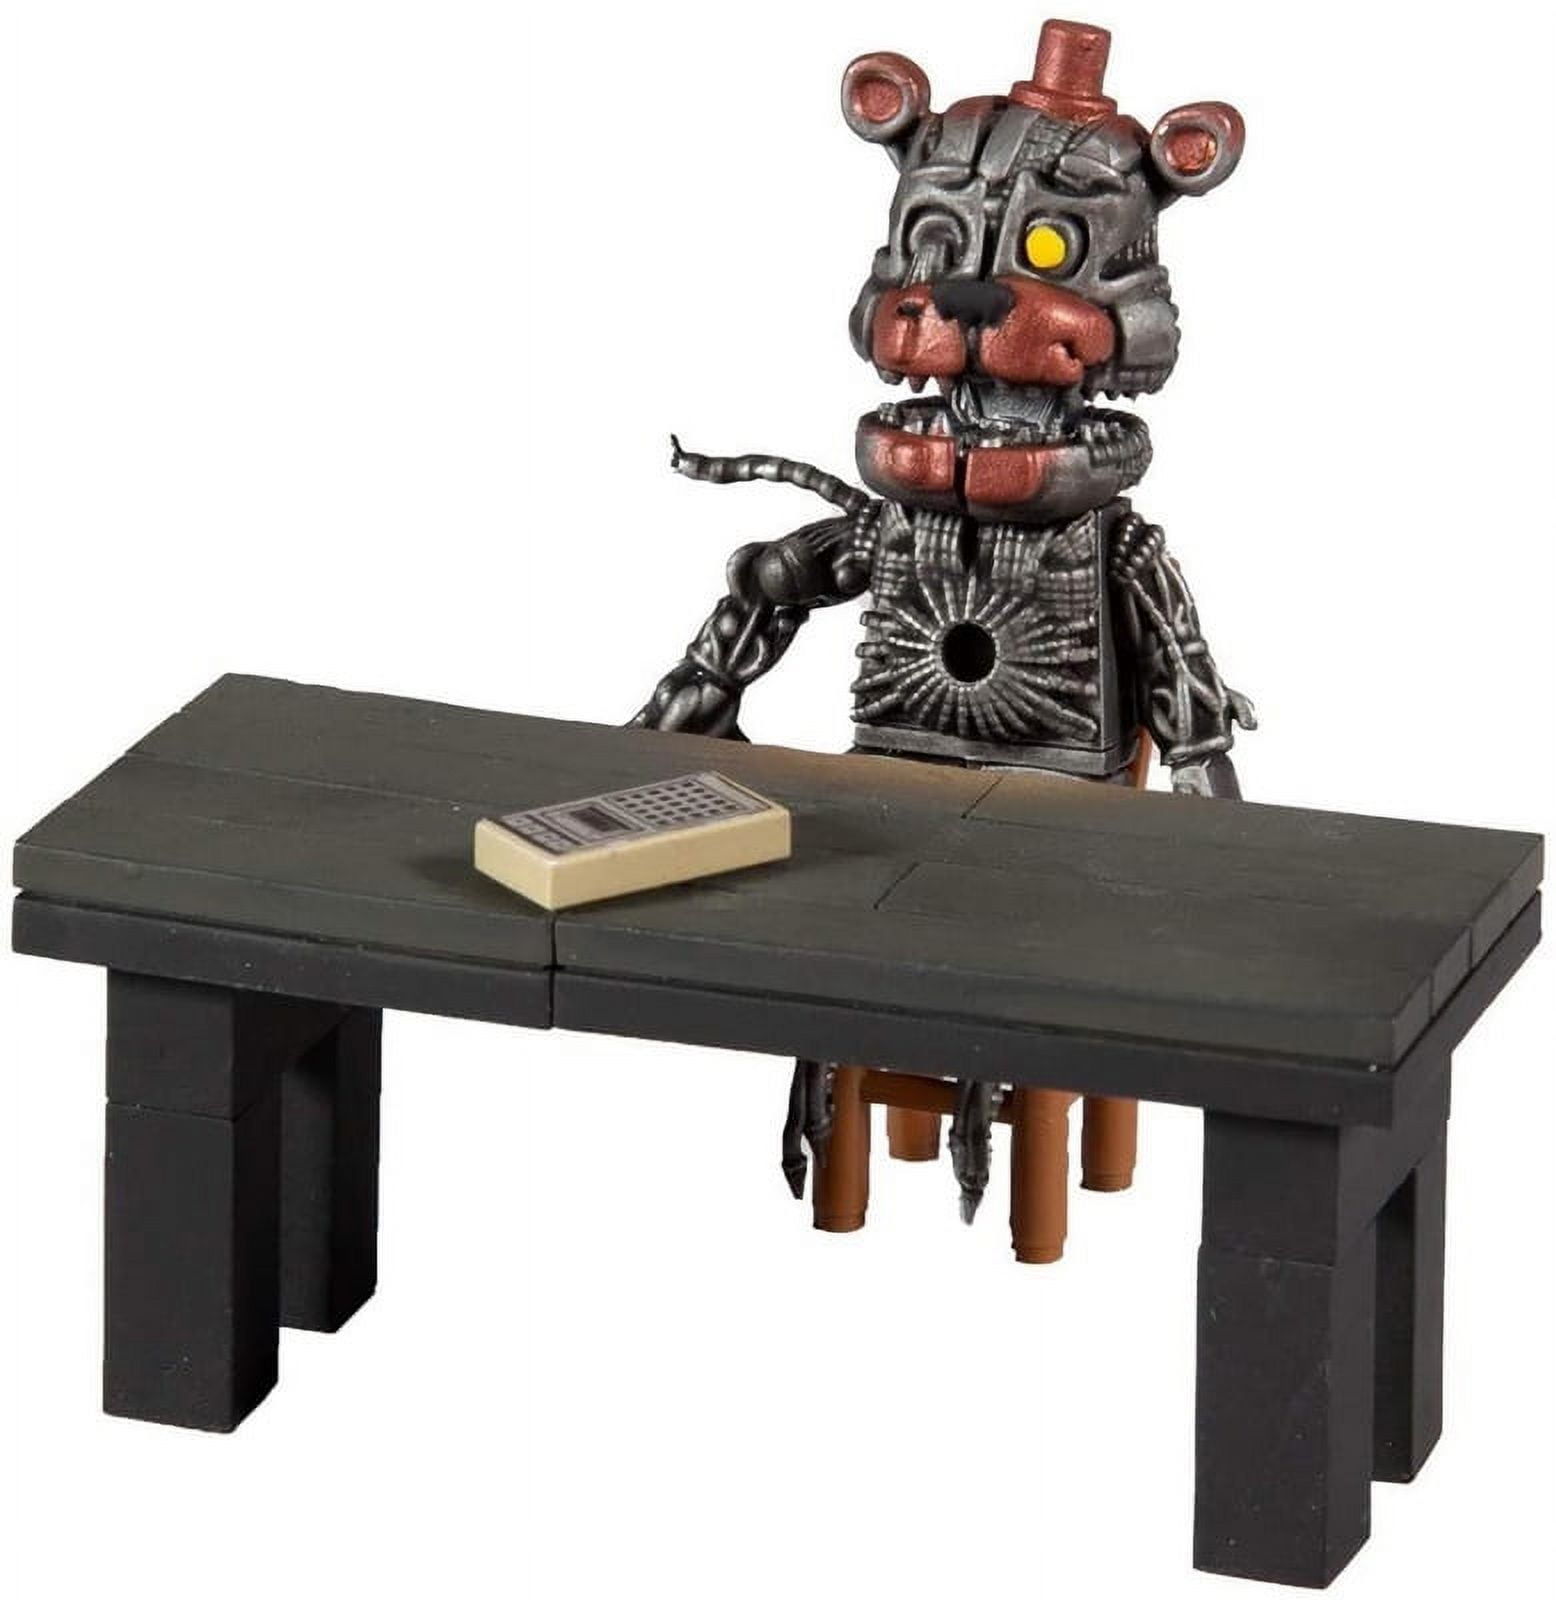 McFarlane Toys Five Nights at Freddy's Parts & Services Micro